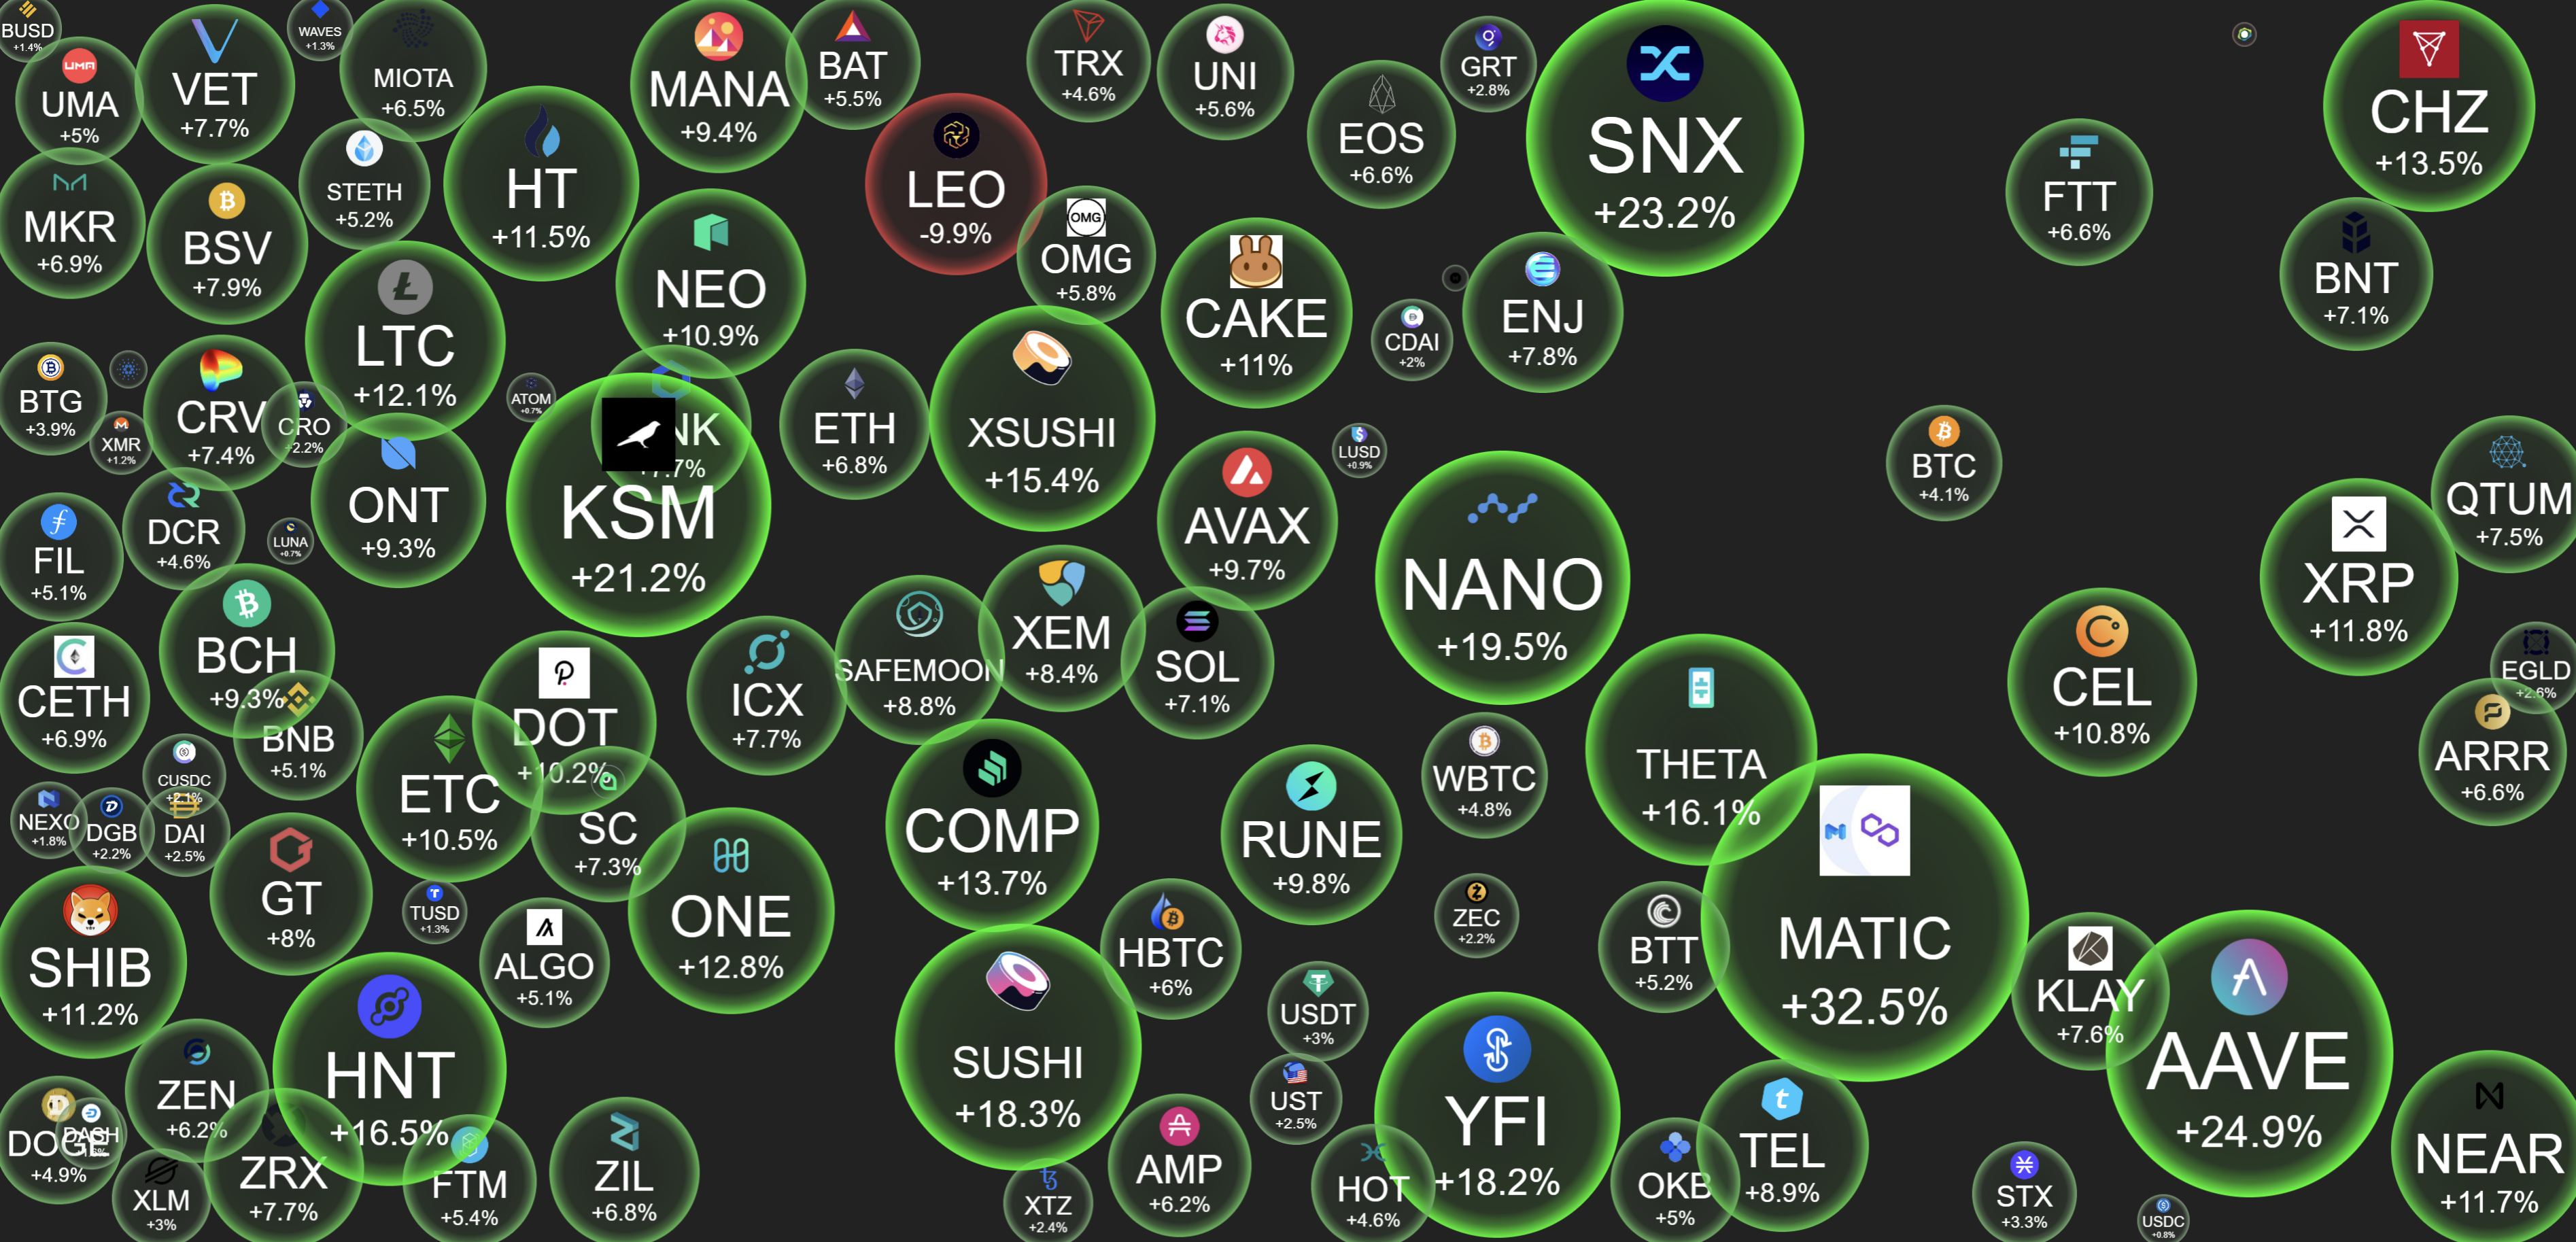 cryptobubbles.net analysis of the cryptocurrency and token market